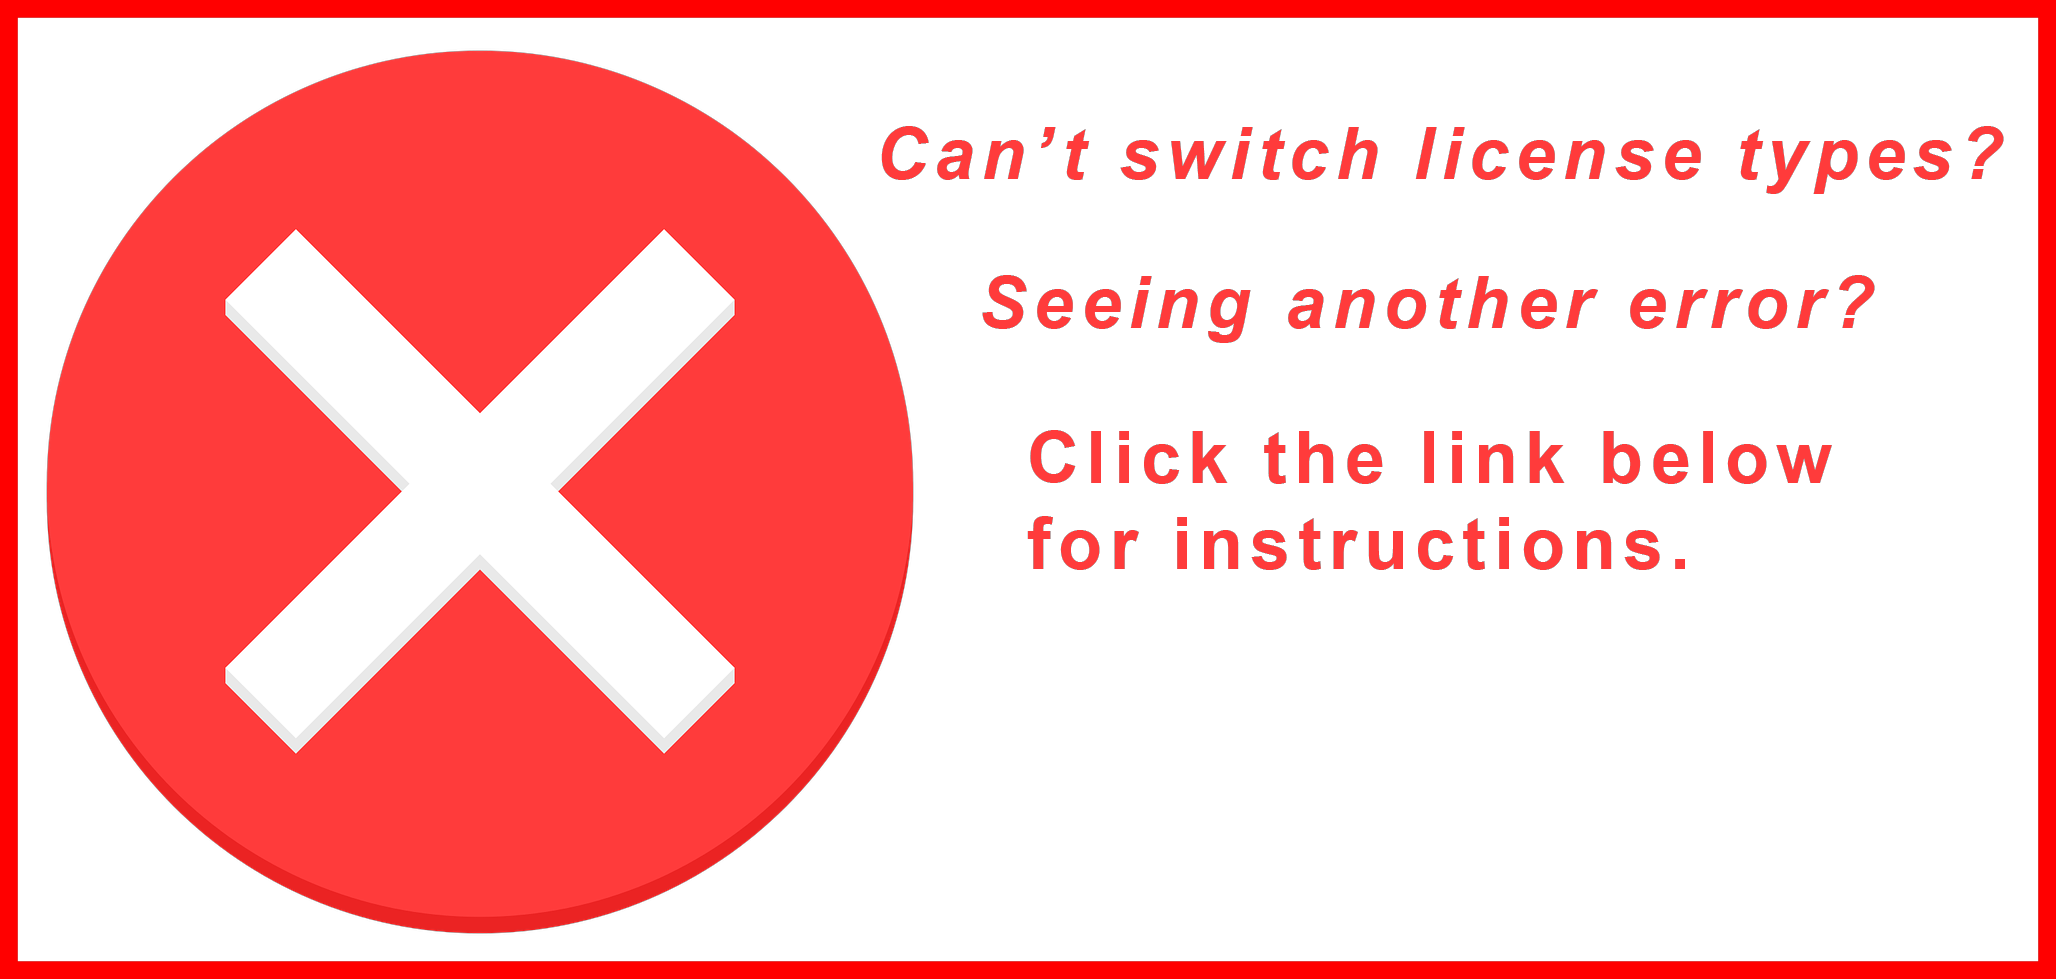 Can't switch license types? Seeing an error?